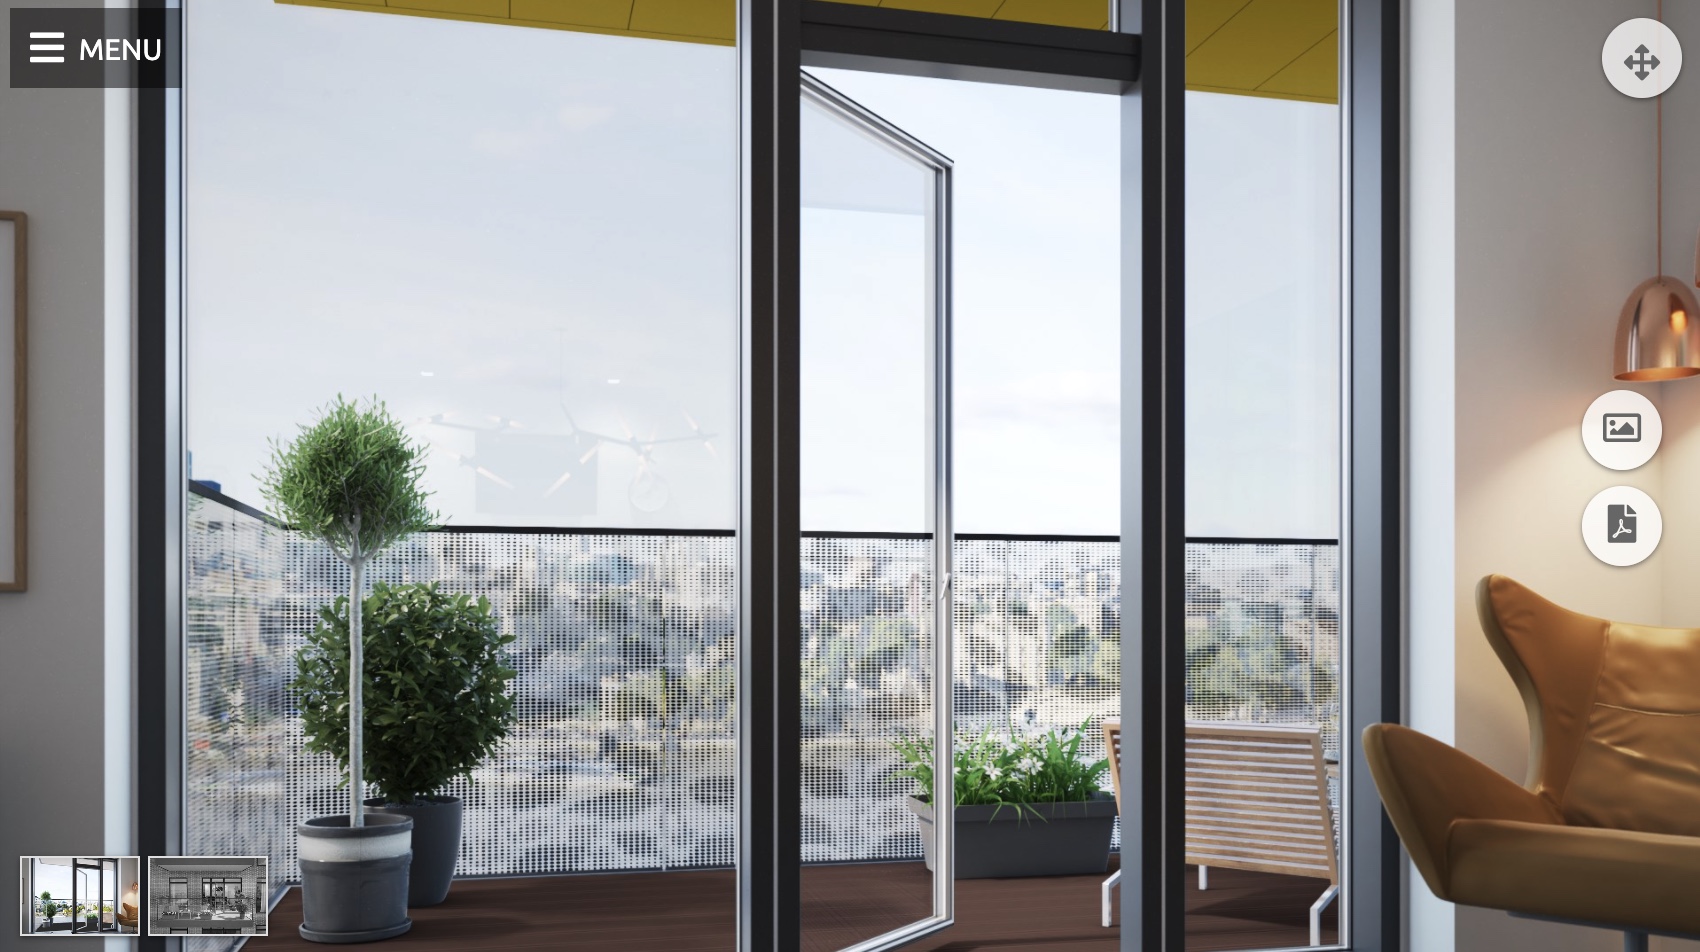 Photorealistic image from Sapphire Balconies' 3D visualizer